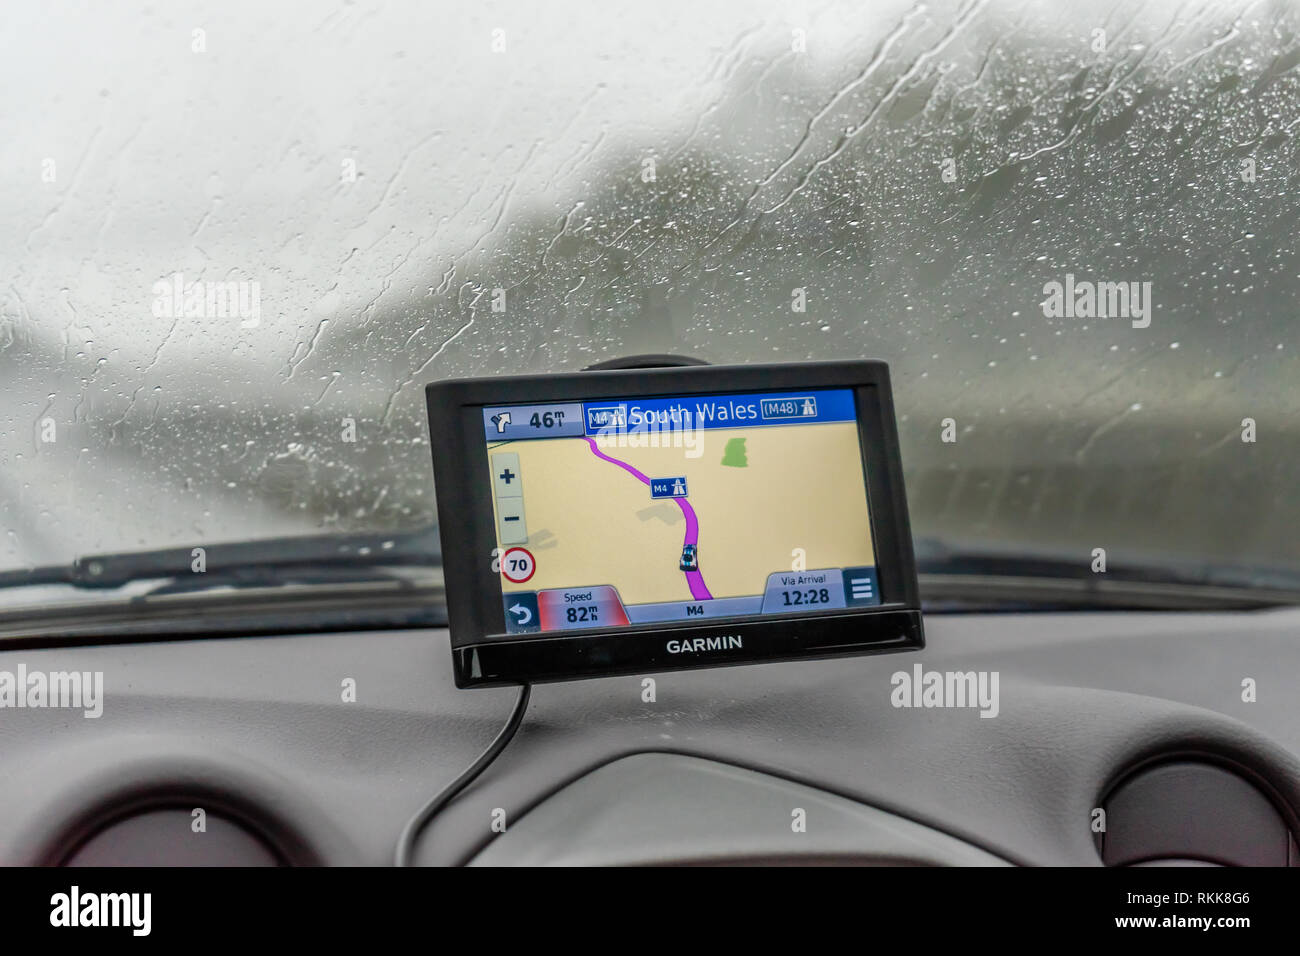 A Garmin sat nav or satellite navigation system mounted to a car wind screen during rainy weather, UK Stock Photo